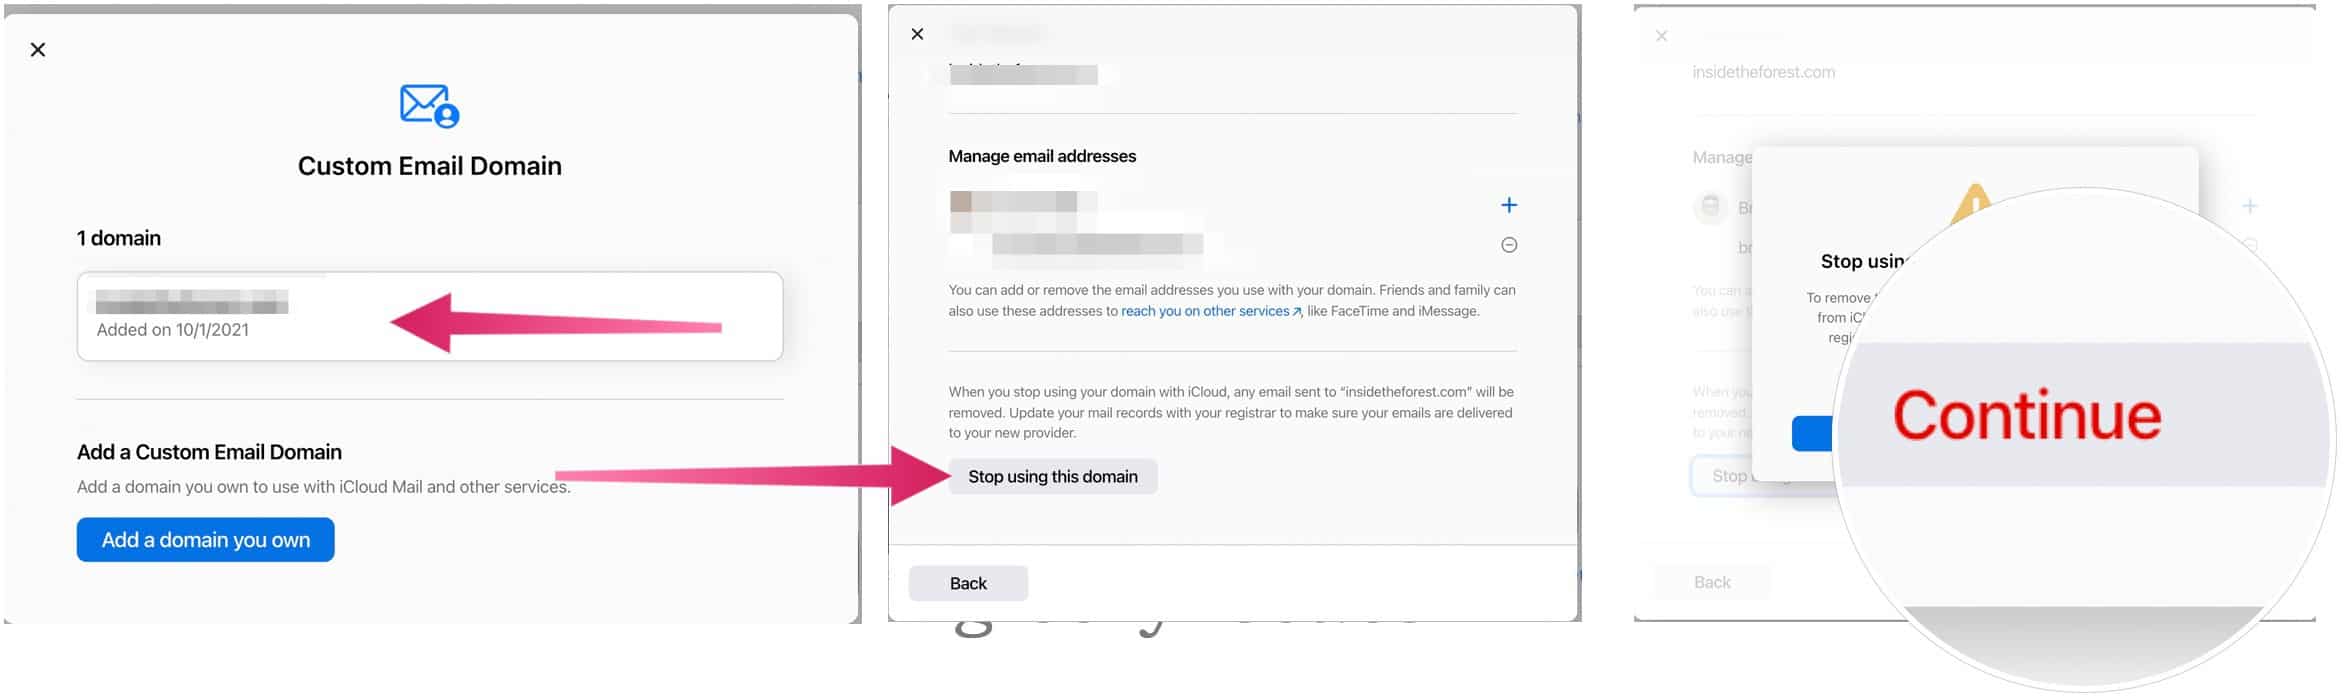 How to Set Up Custom Email Domains with iCloud Mail - TidBITS